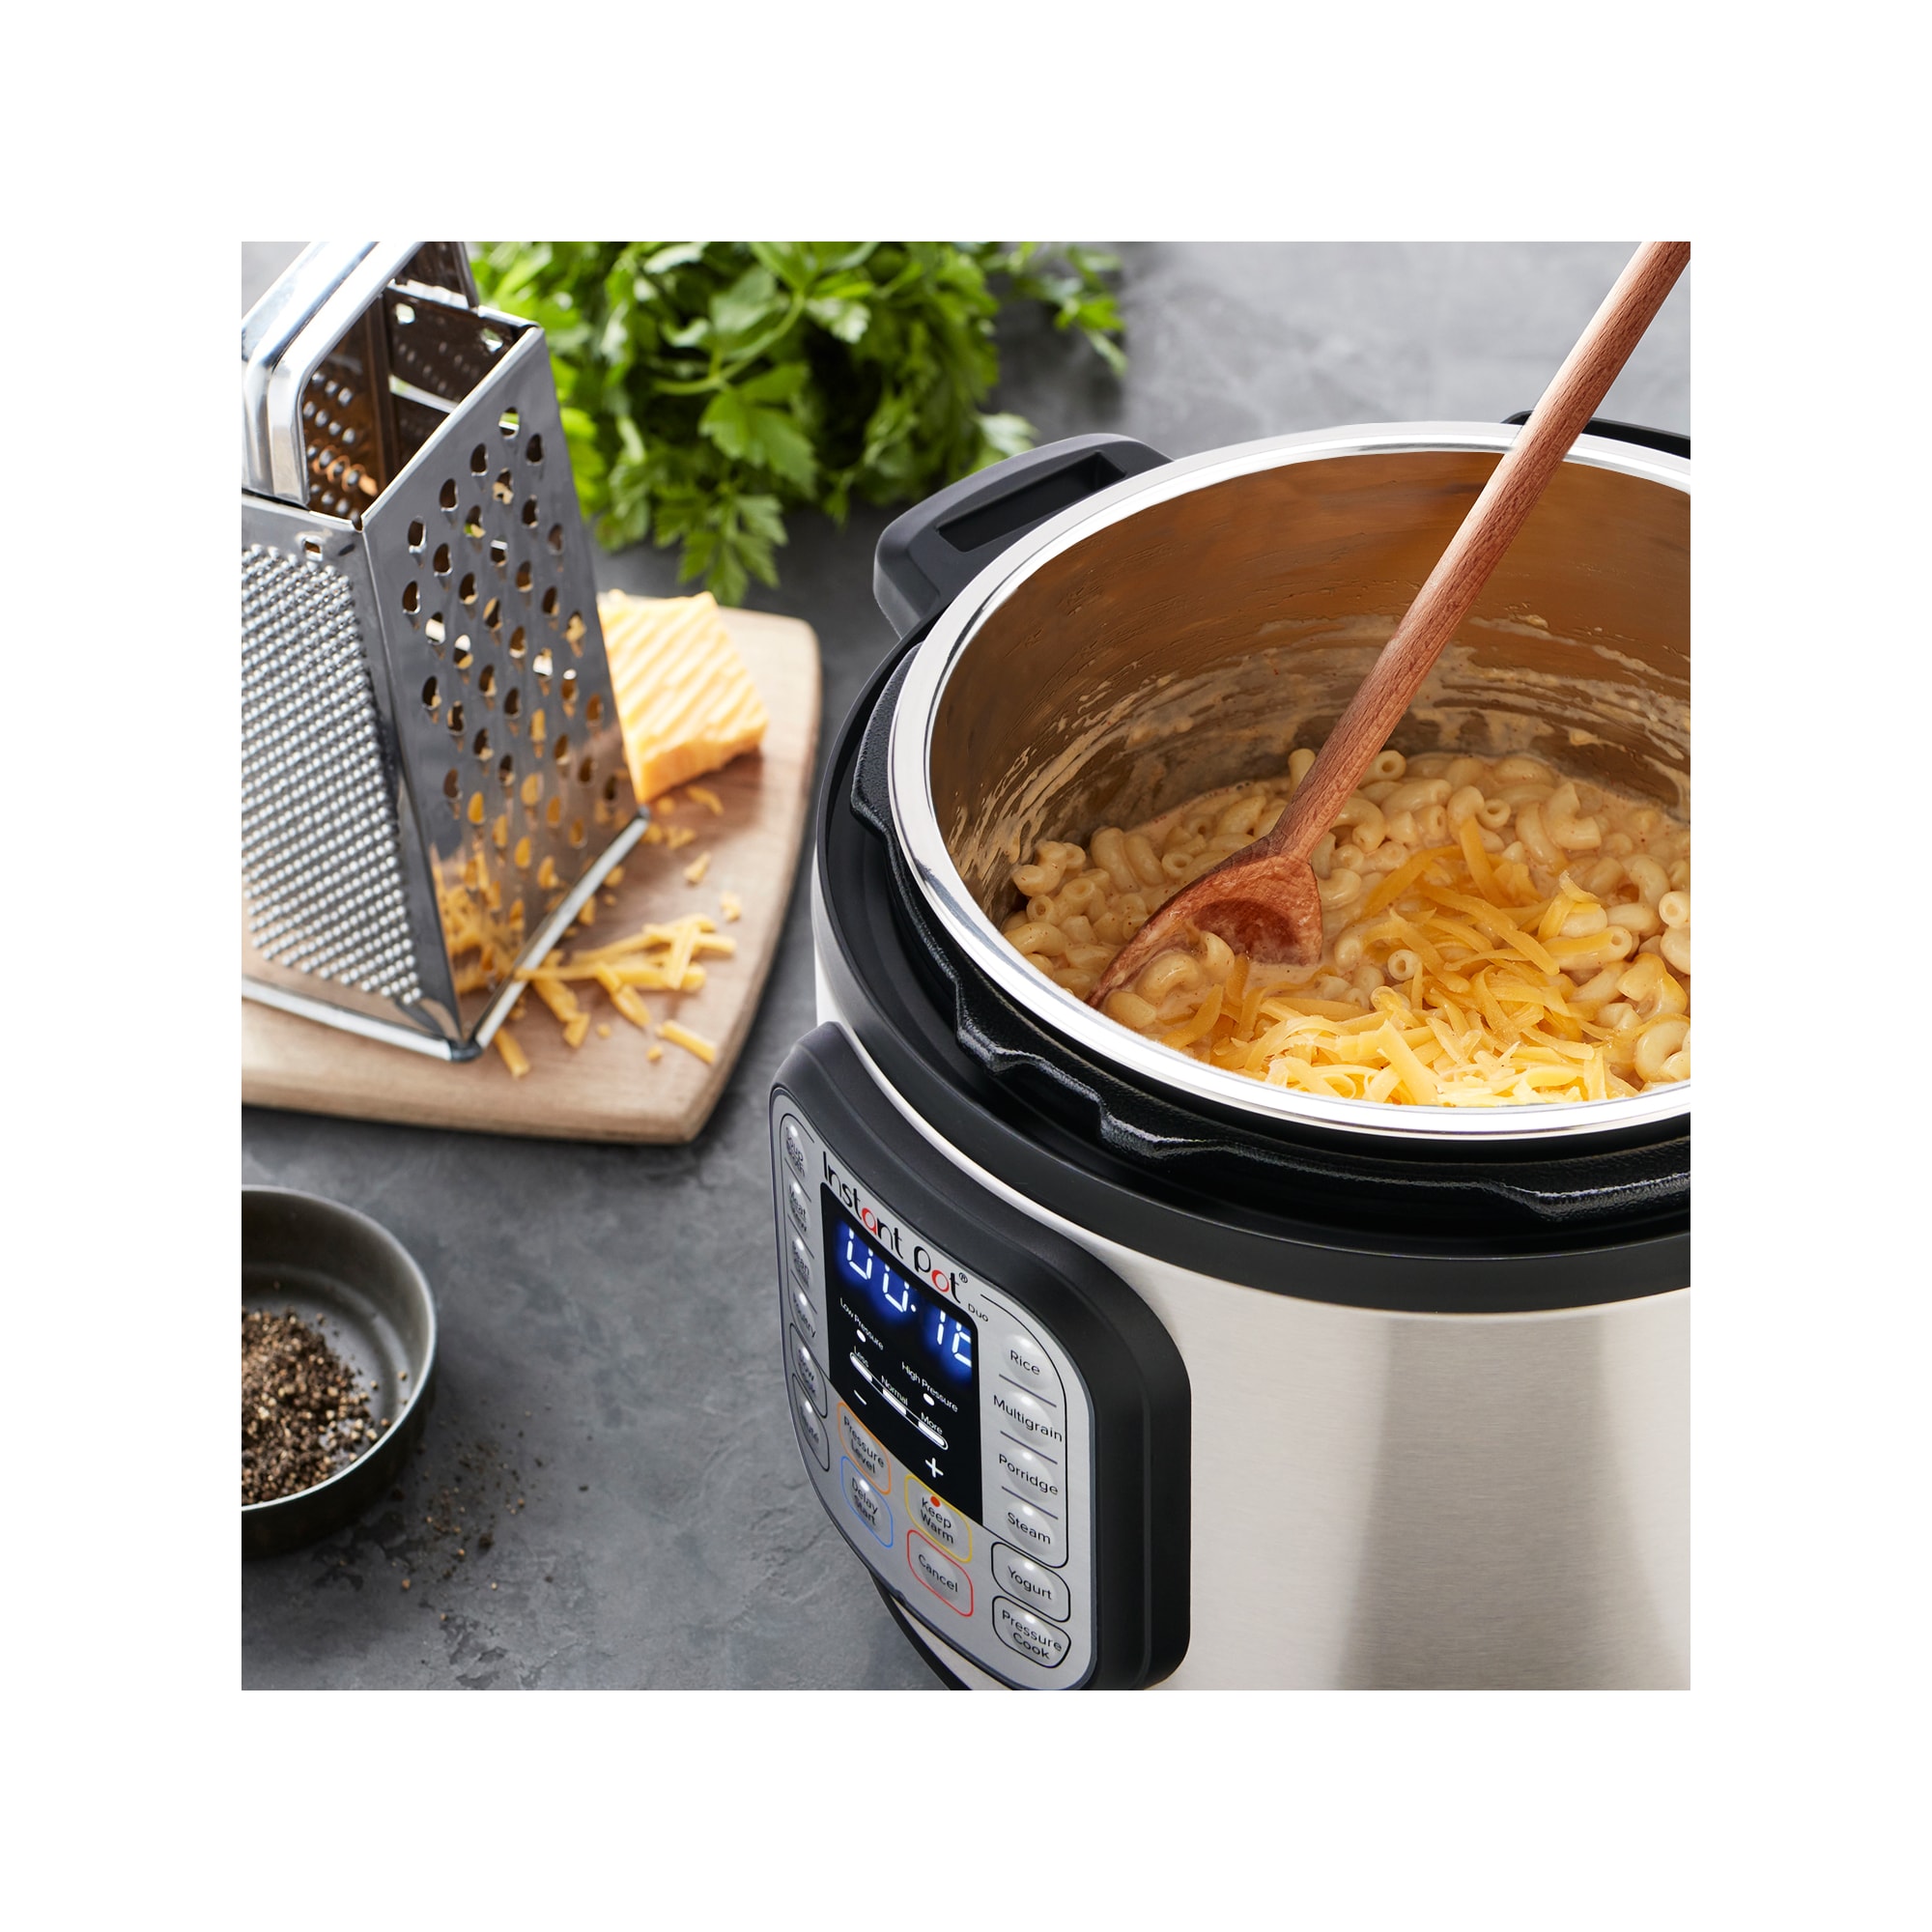 Can I use an extension cord with my Instant Brands rice cooker?